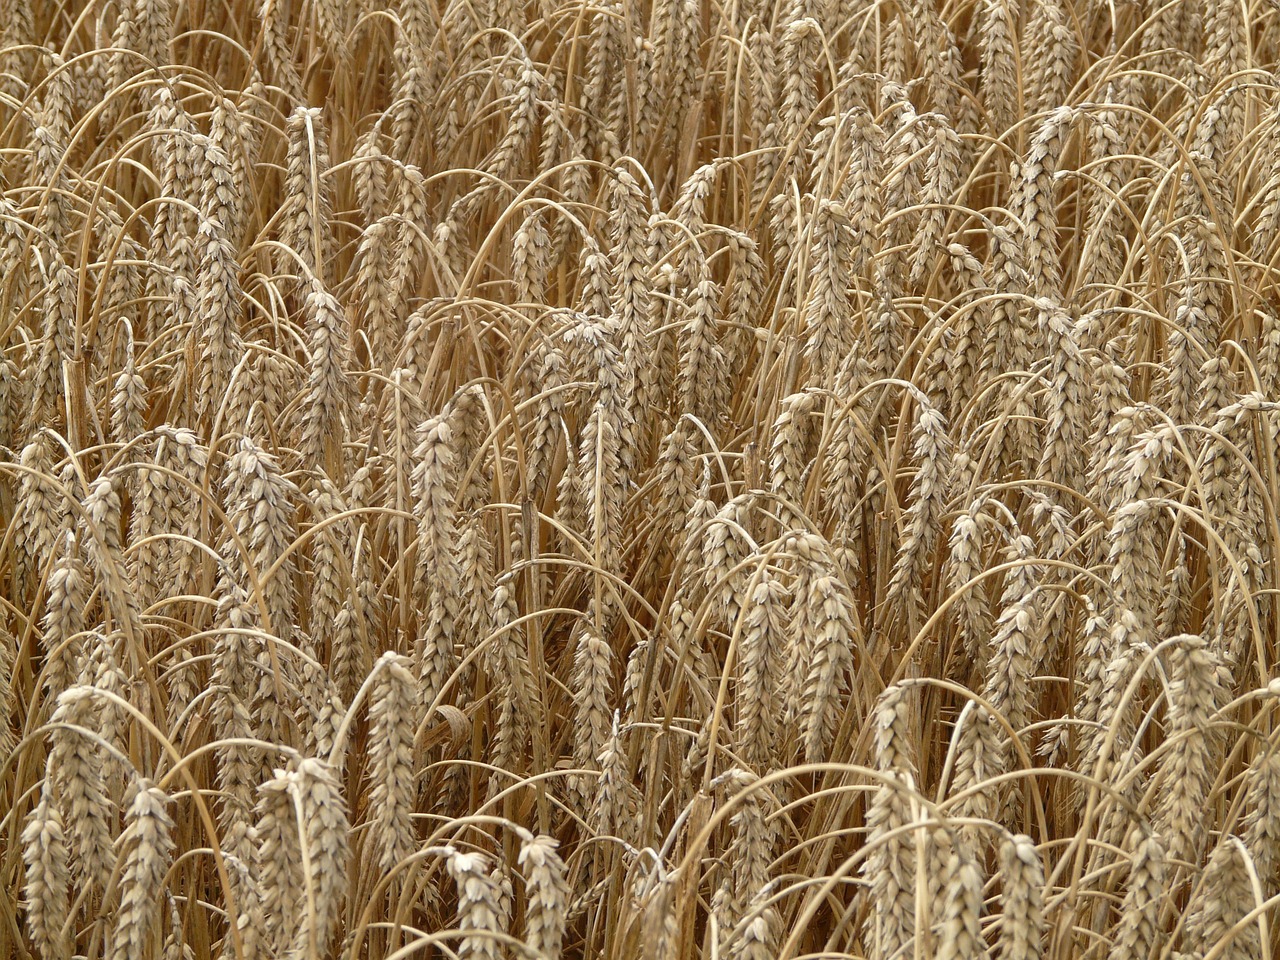 wheat spike cereals free photo